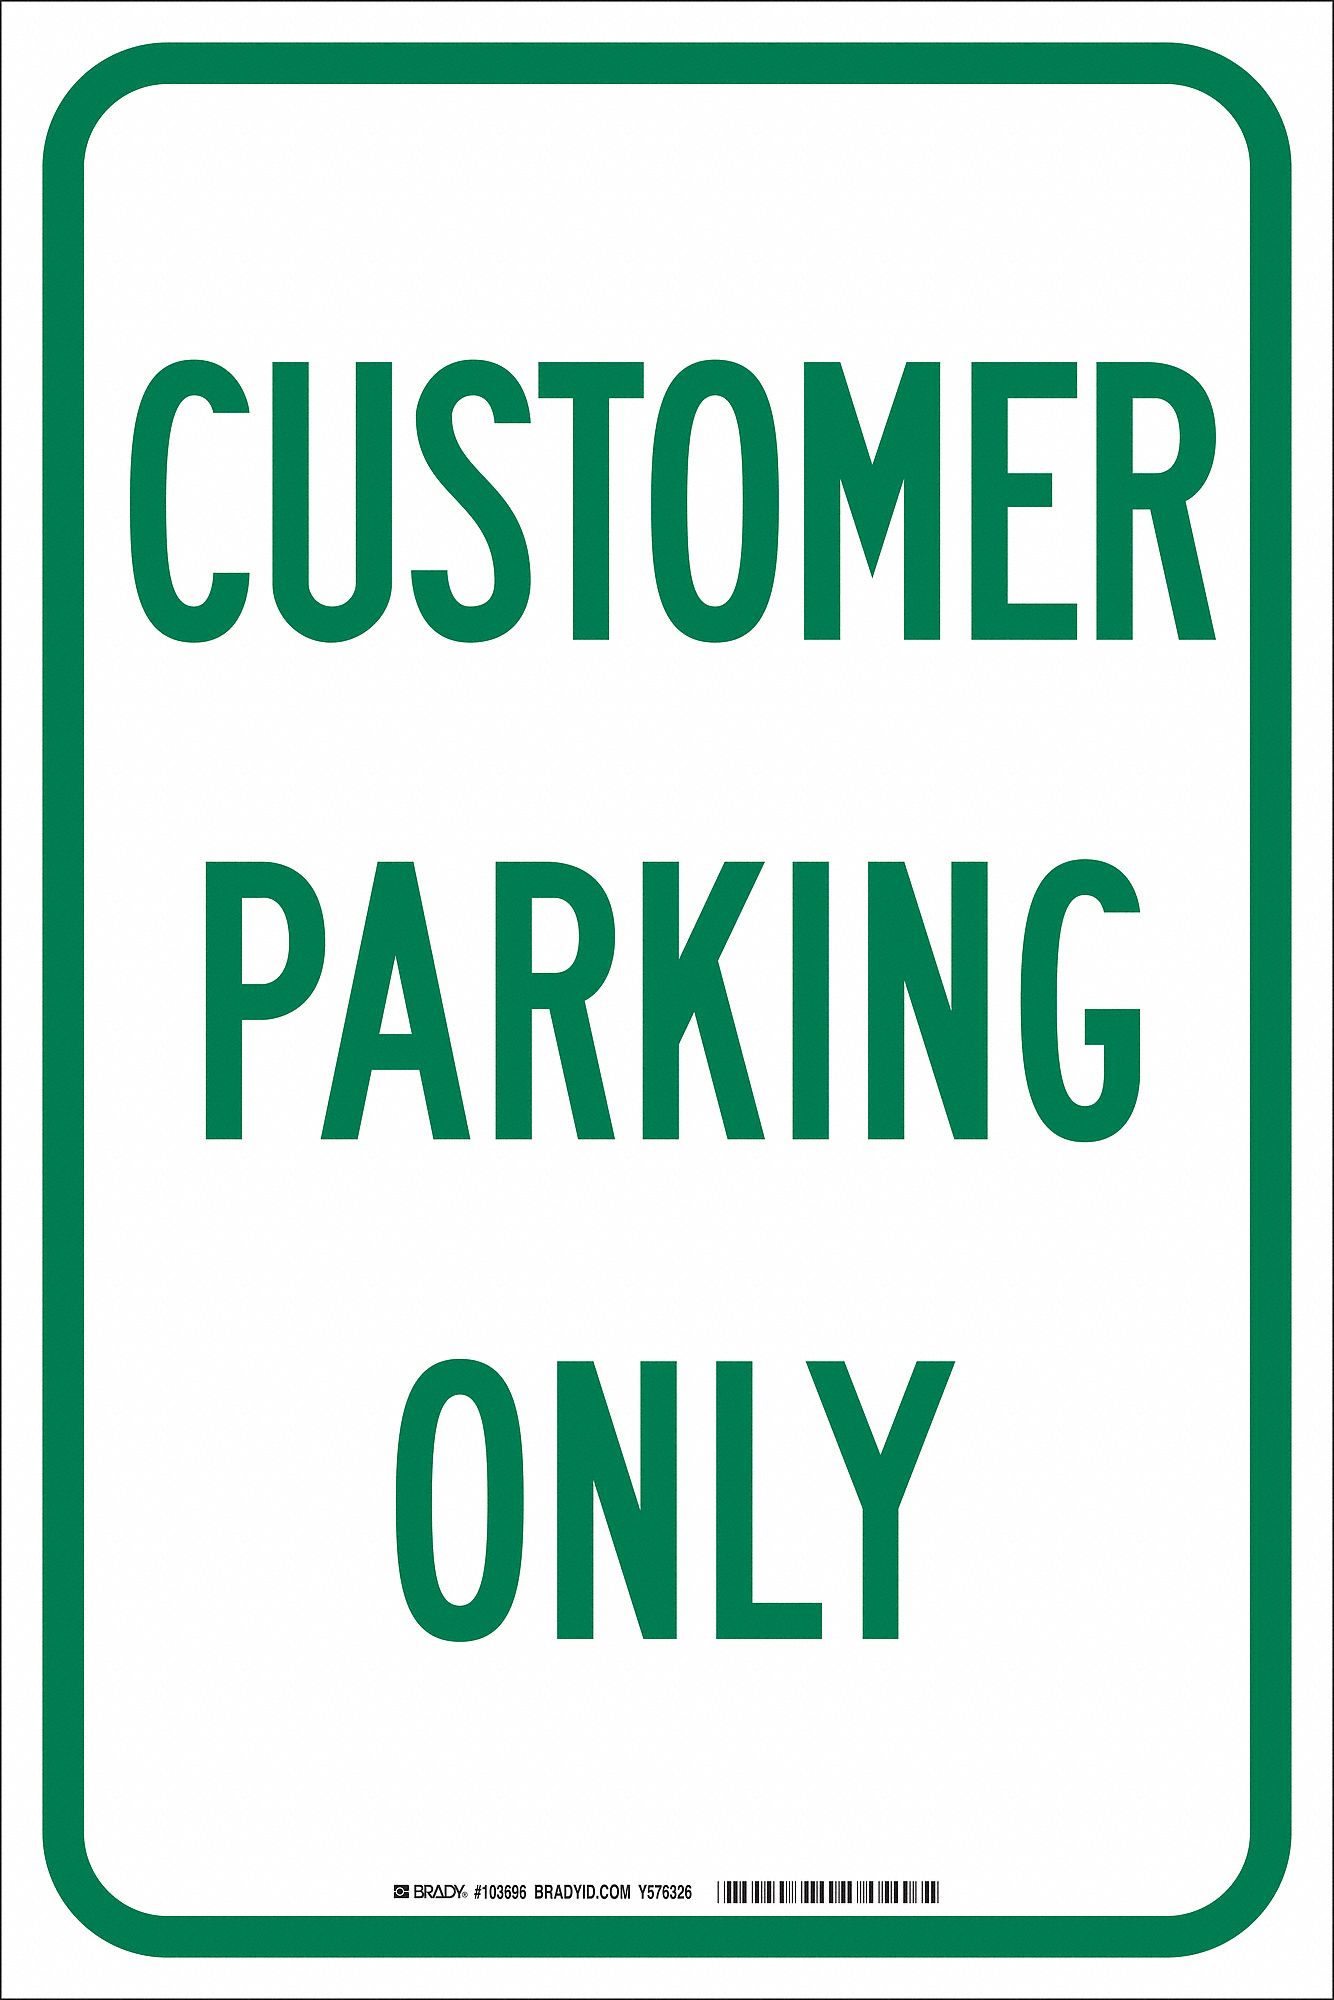 TextCustomer Parking Only Reflective Aluminum, Parking Sign Height 18